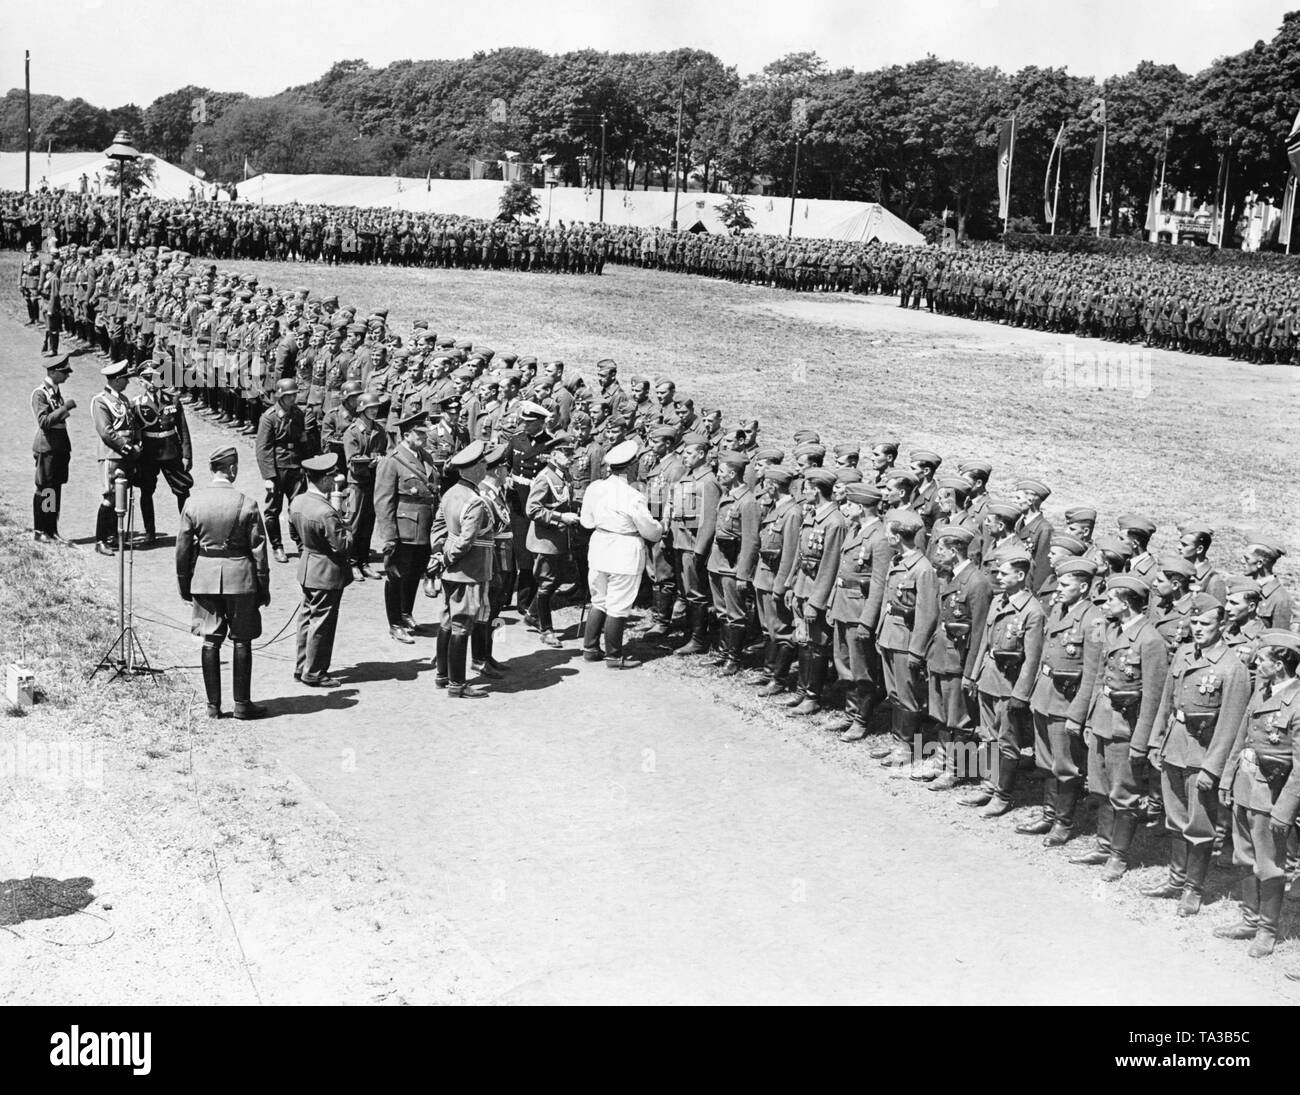 Together with other high-ranking members of the military, Field Marshal General Hermann Goering (in a white uniform) awards corporals and officers of the Condor Legion the Spanish Golden Cross in Doeberitz near Berlin on the 5th of June, 1939. Stock Photo